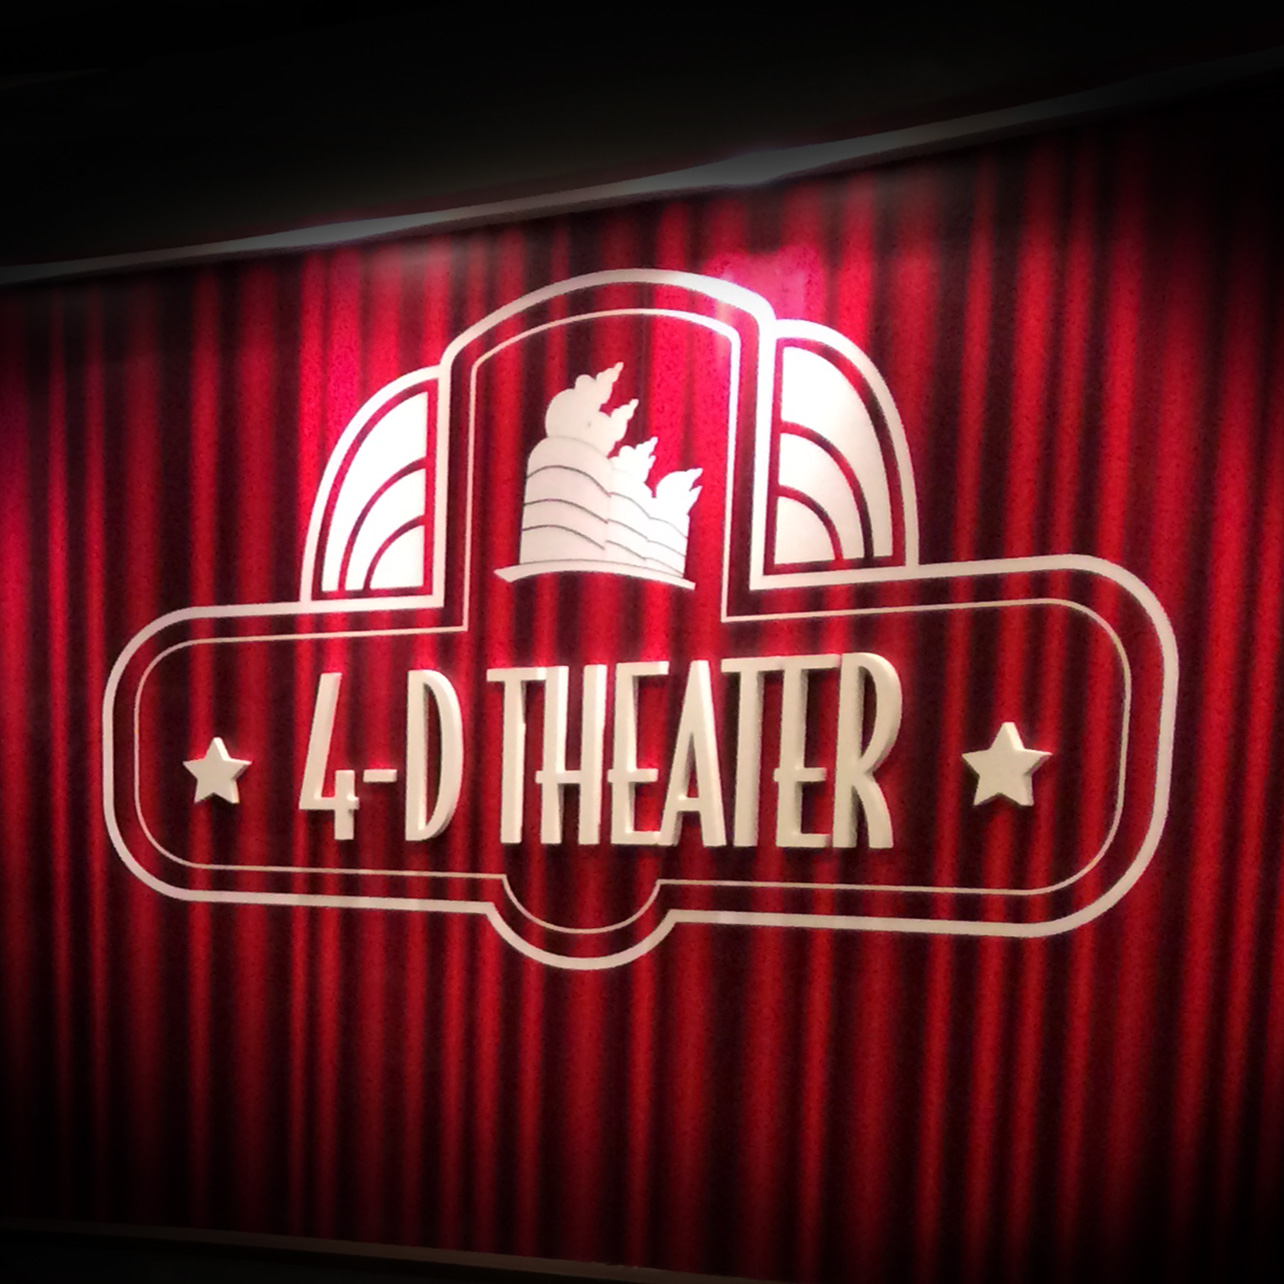 the queen mary 4d theater logo sign on red curtain graphic